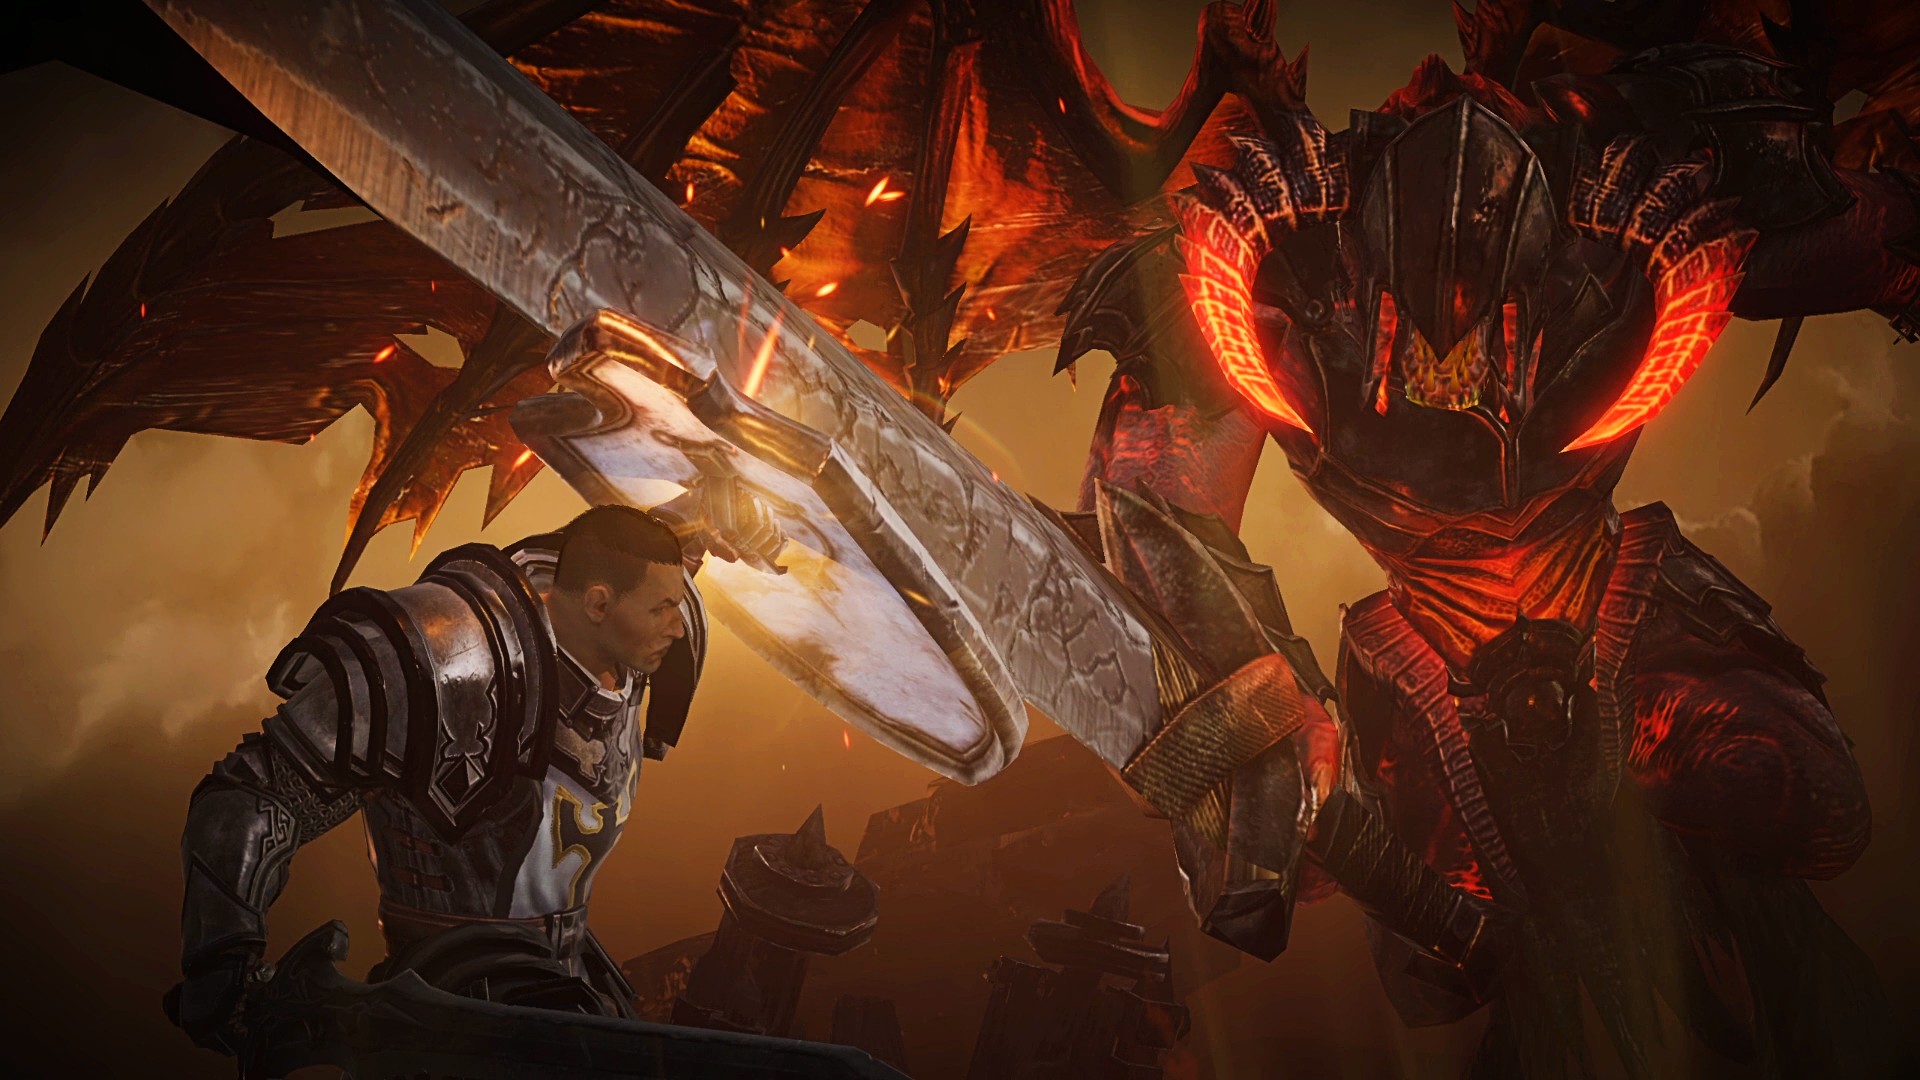 Diablo Immortal gets off to a bad start with widespread bugs and pay-to-win complaints